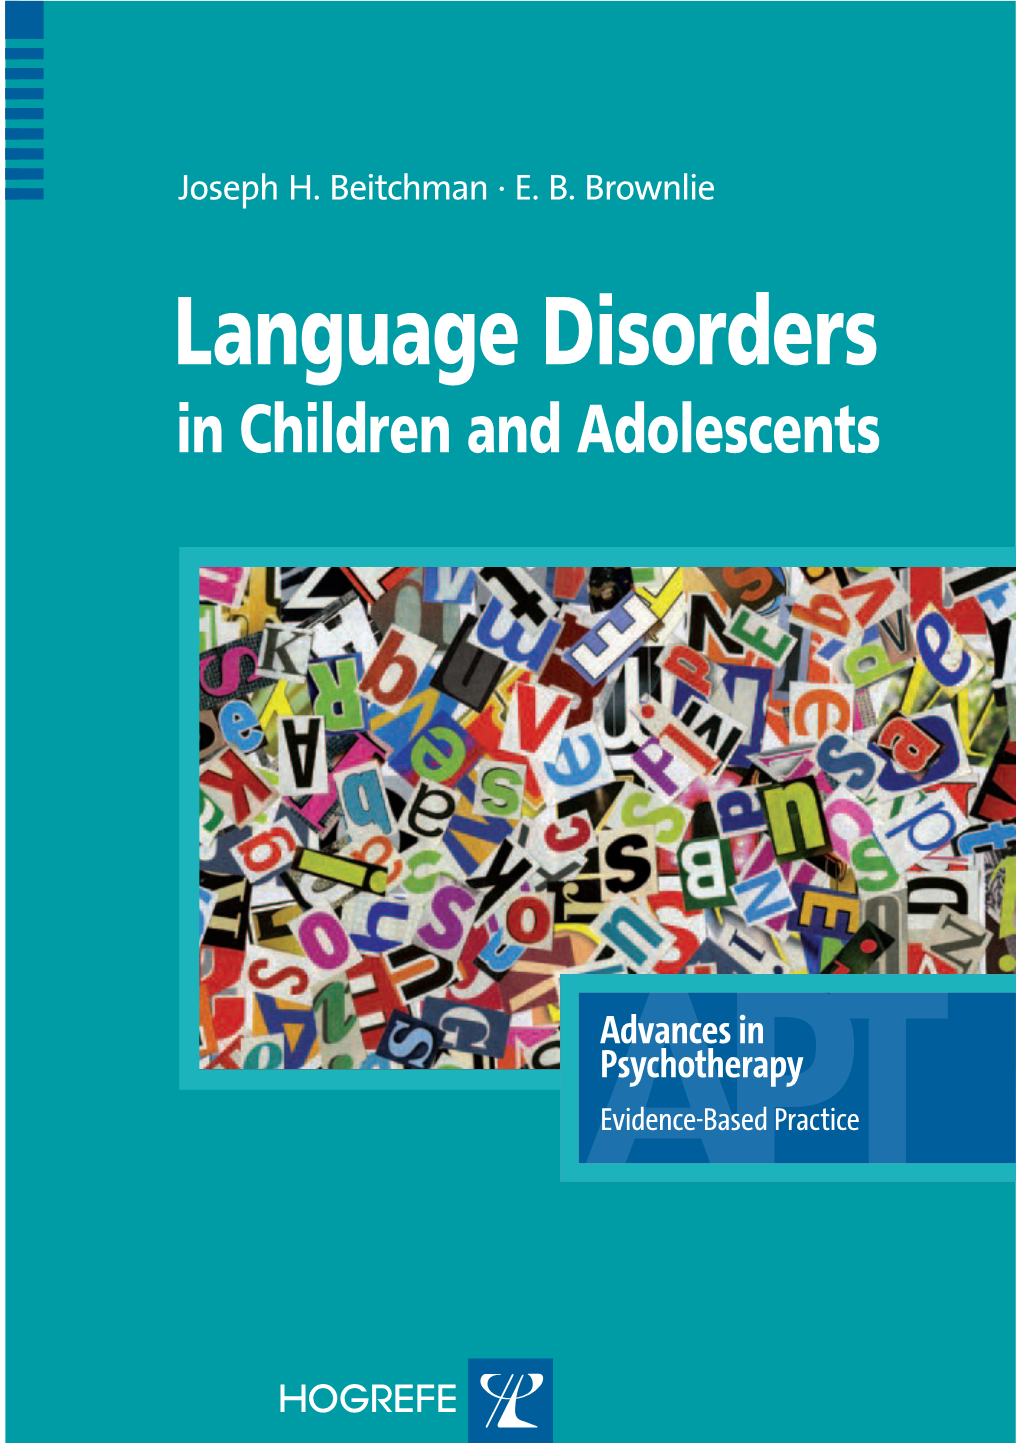 Language Disorders in Children and Adolescents